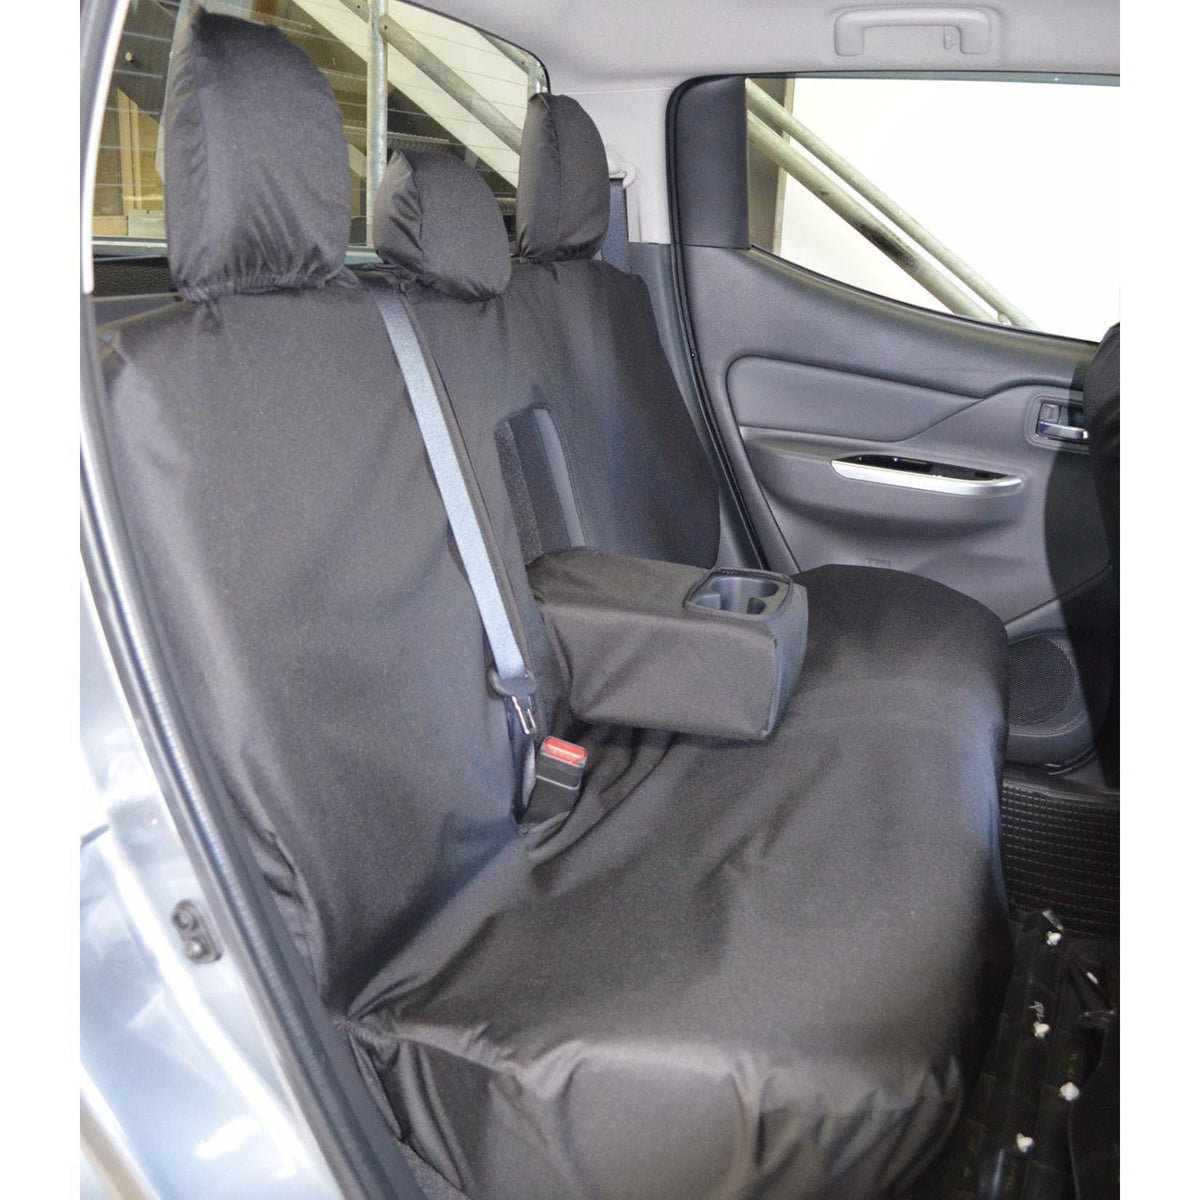 MITSUBISHI L200 2015 ON MK7 - DOUBLE CAB REAR SEAT COVERS - BLACK - Storm Xccessories2